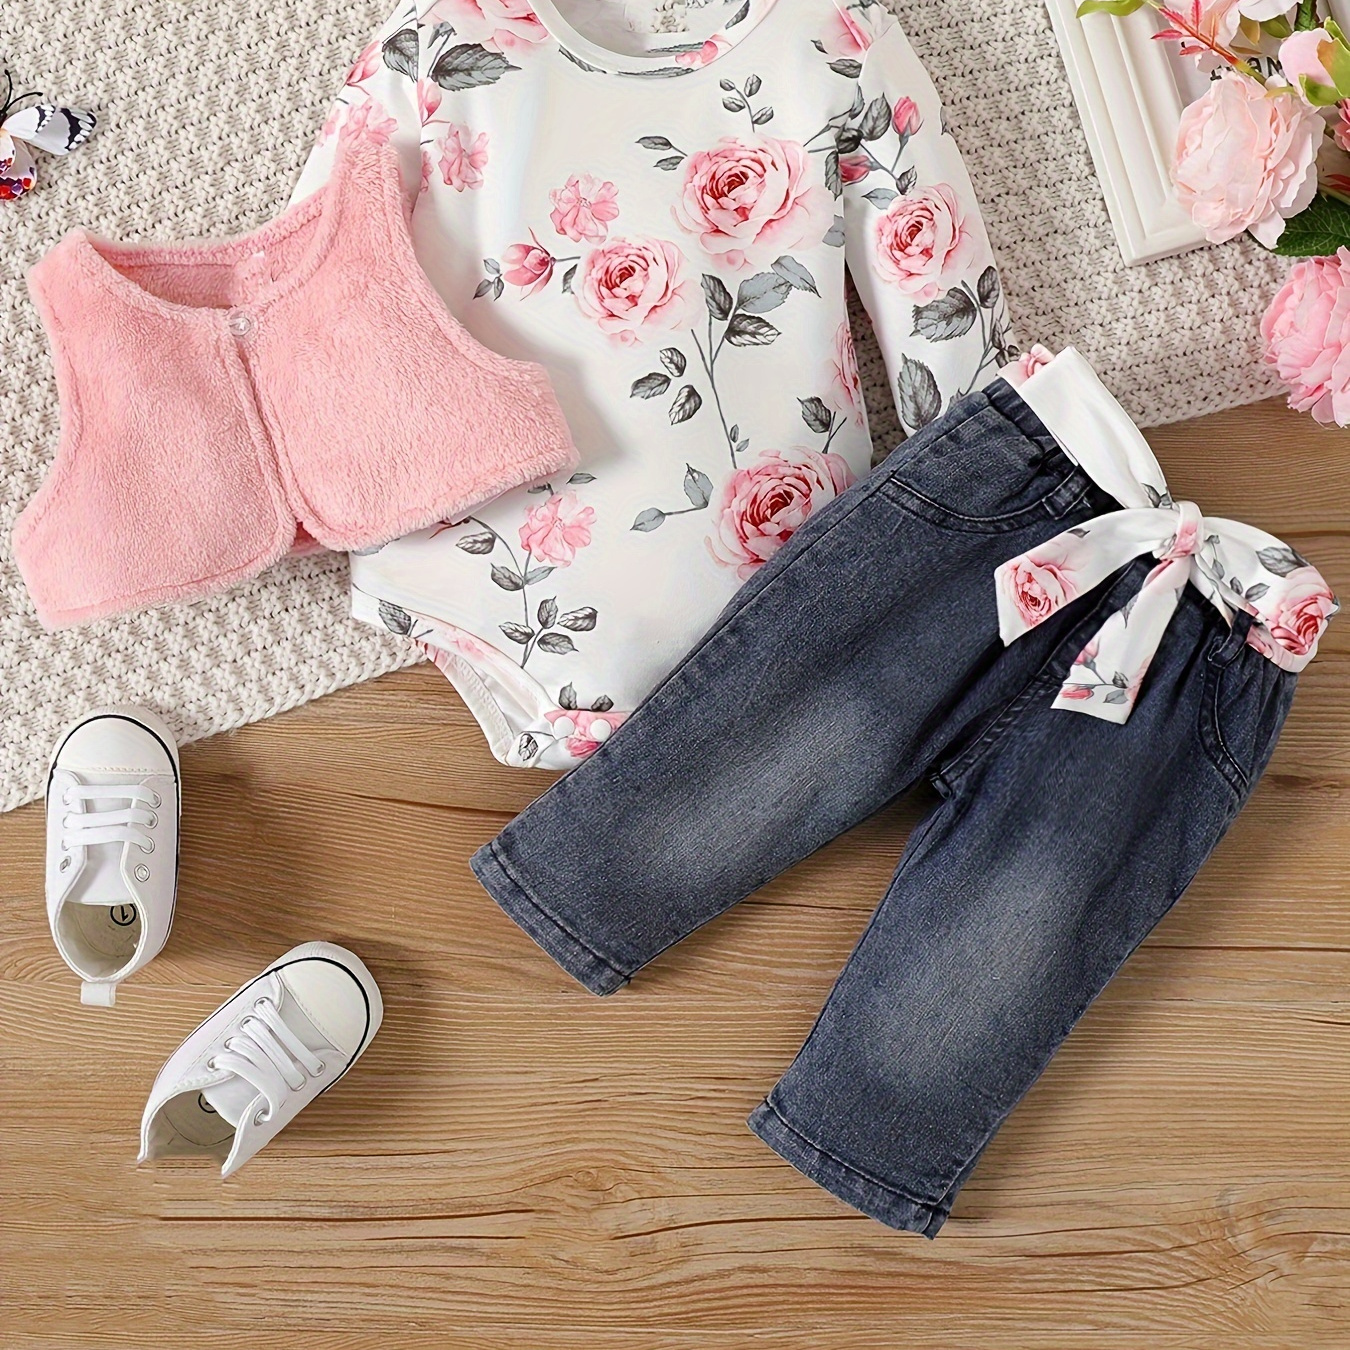 

Infant Newborn Baby Girls Long Sleeve Floral Print Flower Romper Tops Jeans Pants With Fleece Vest Girls Summer Casual Outfit